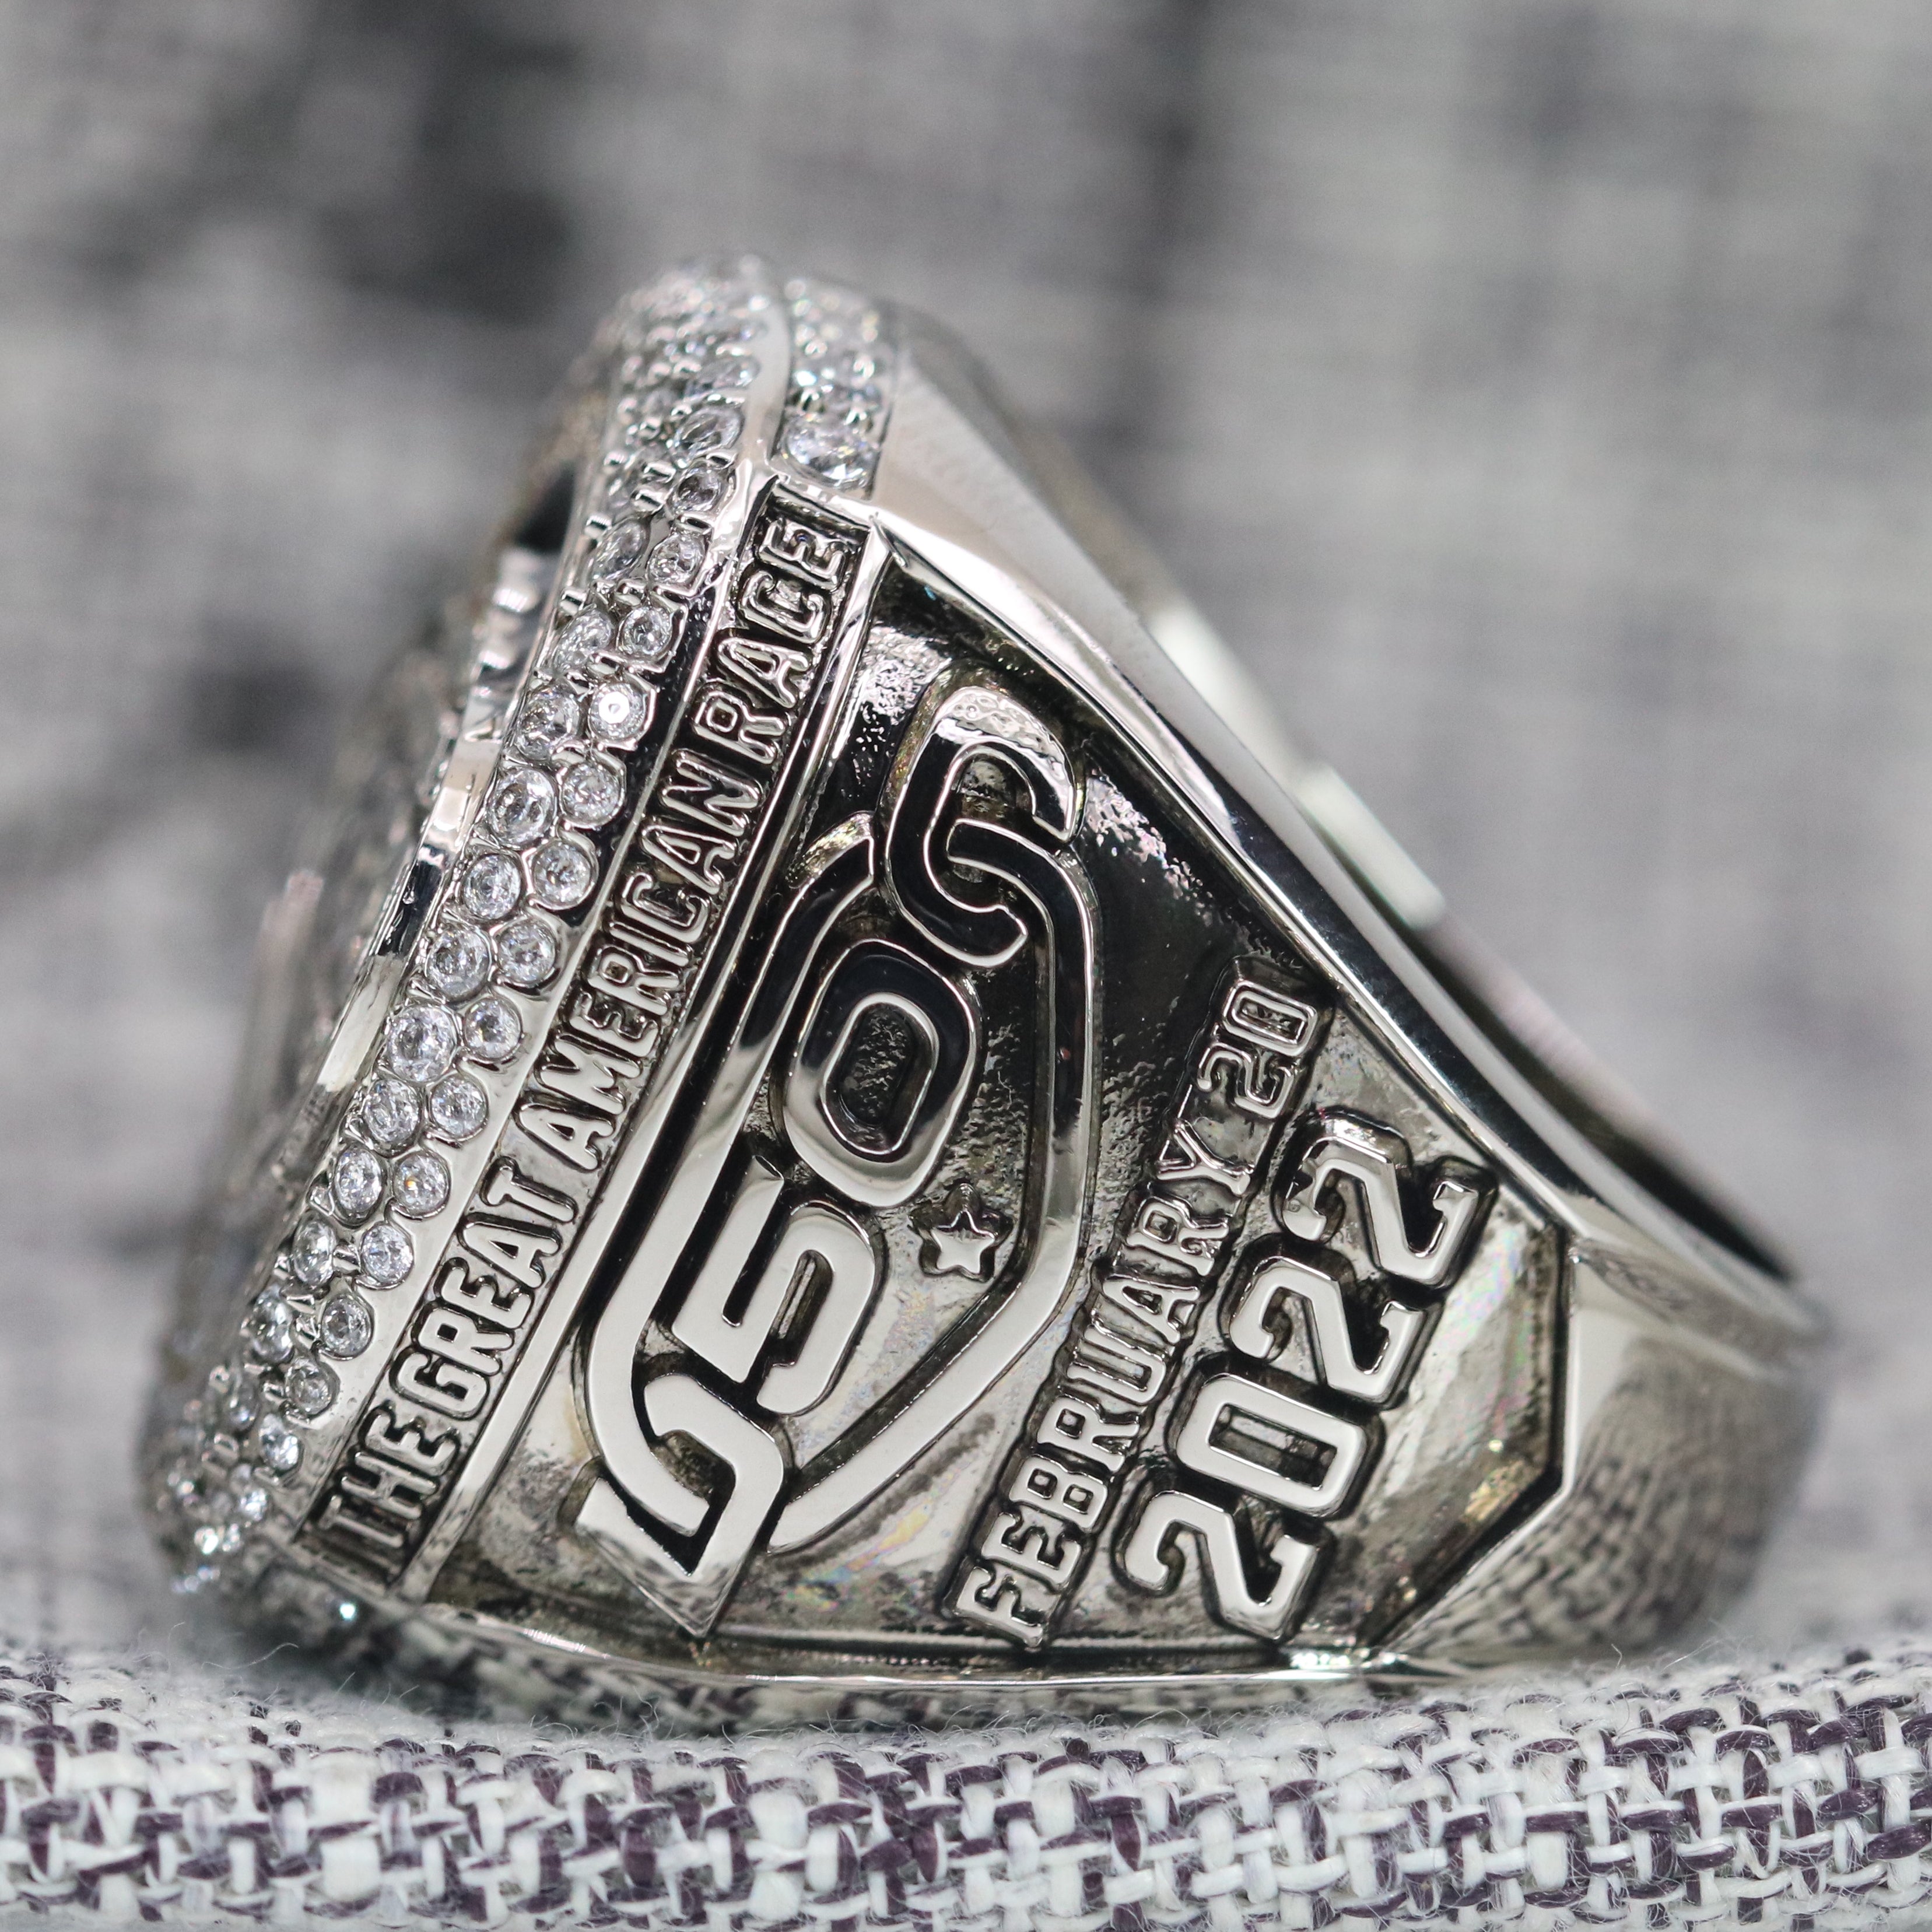 Lakers Rings - Rings Count, Years, Cost & Lakers Championship Rings History